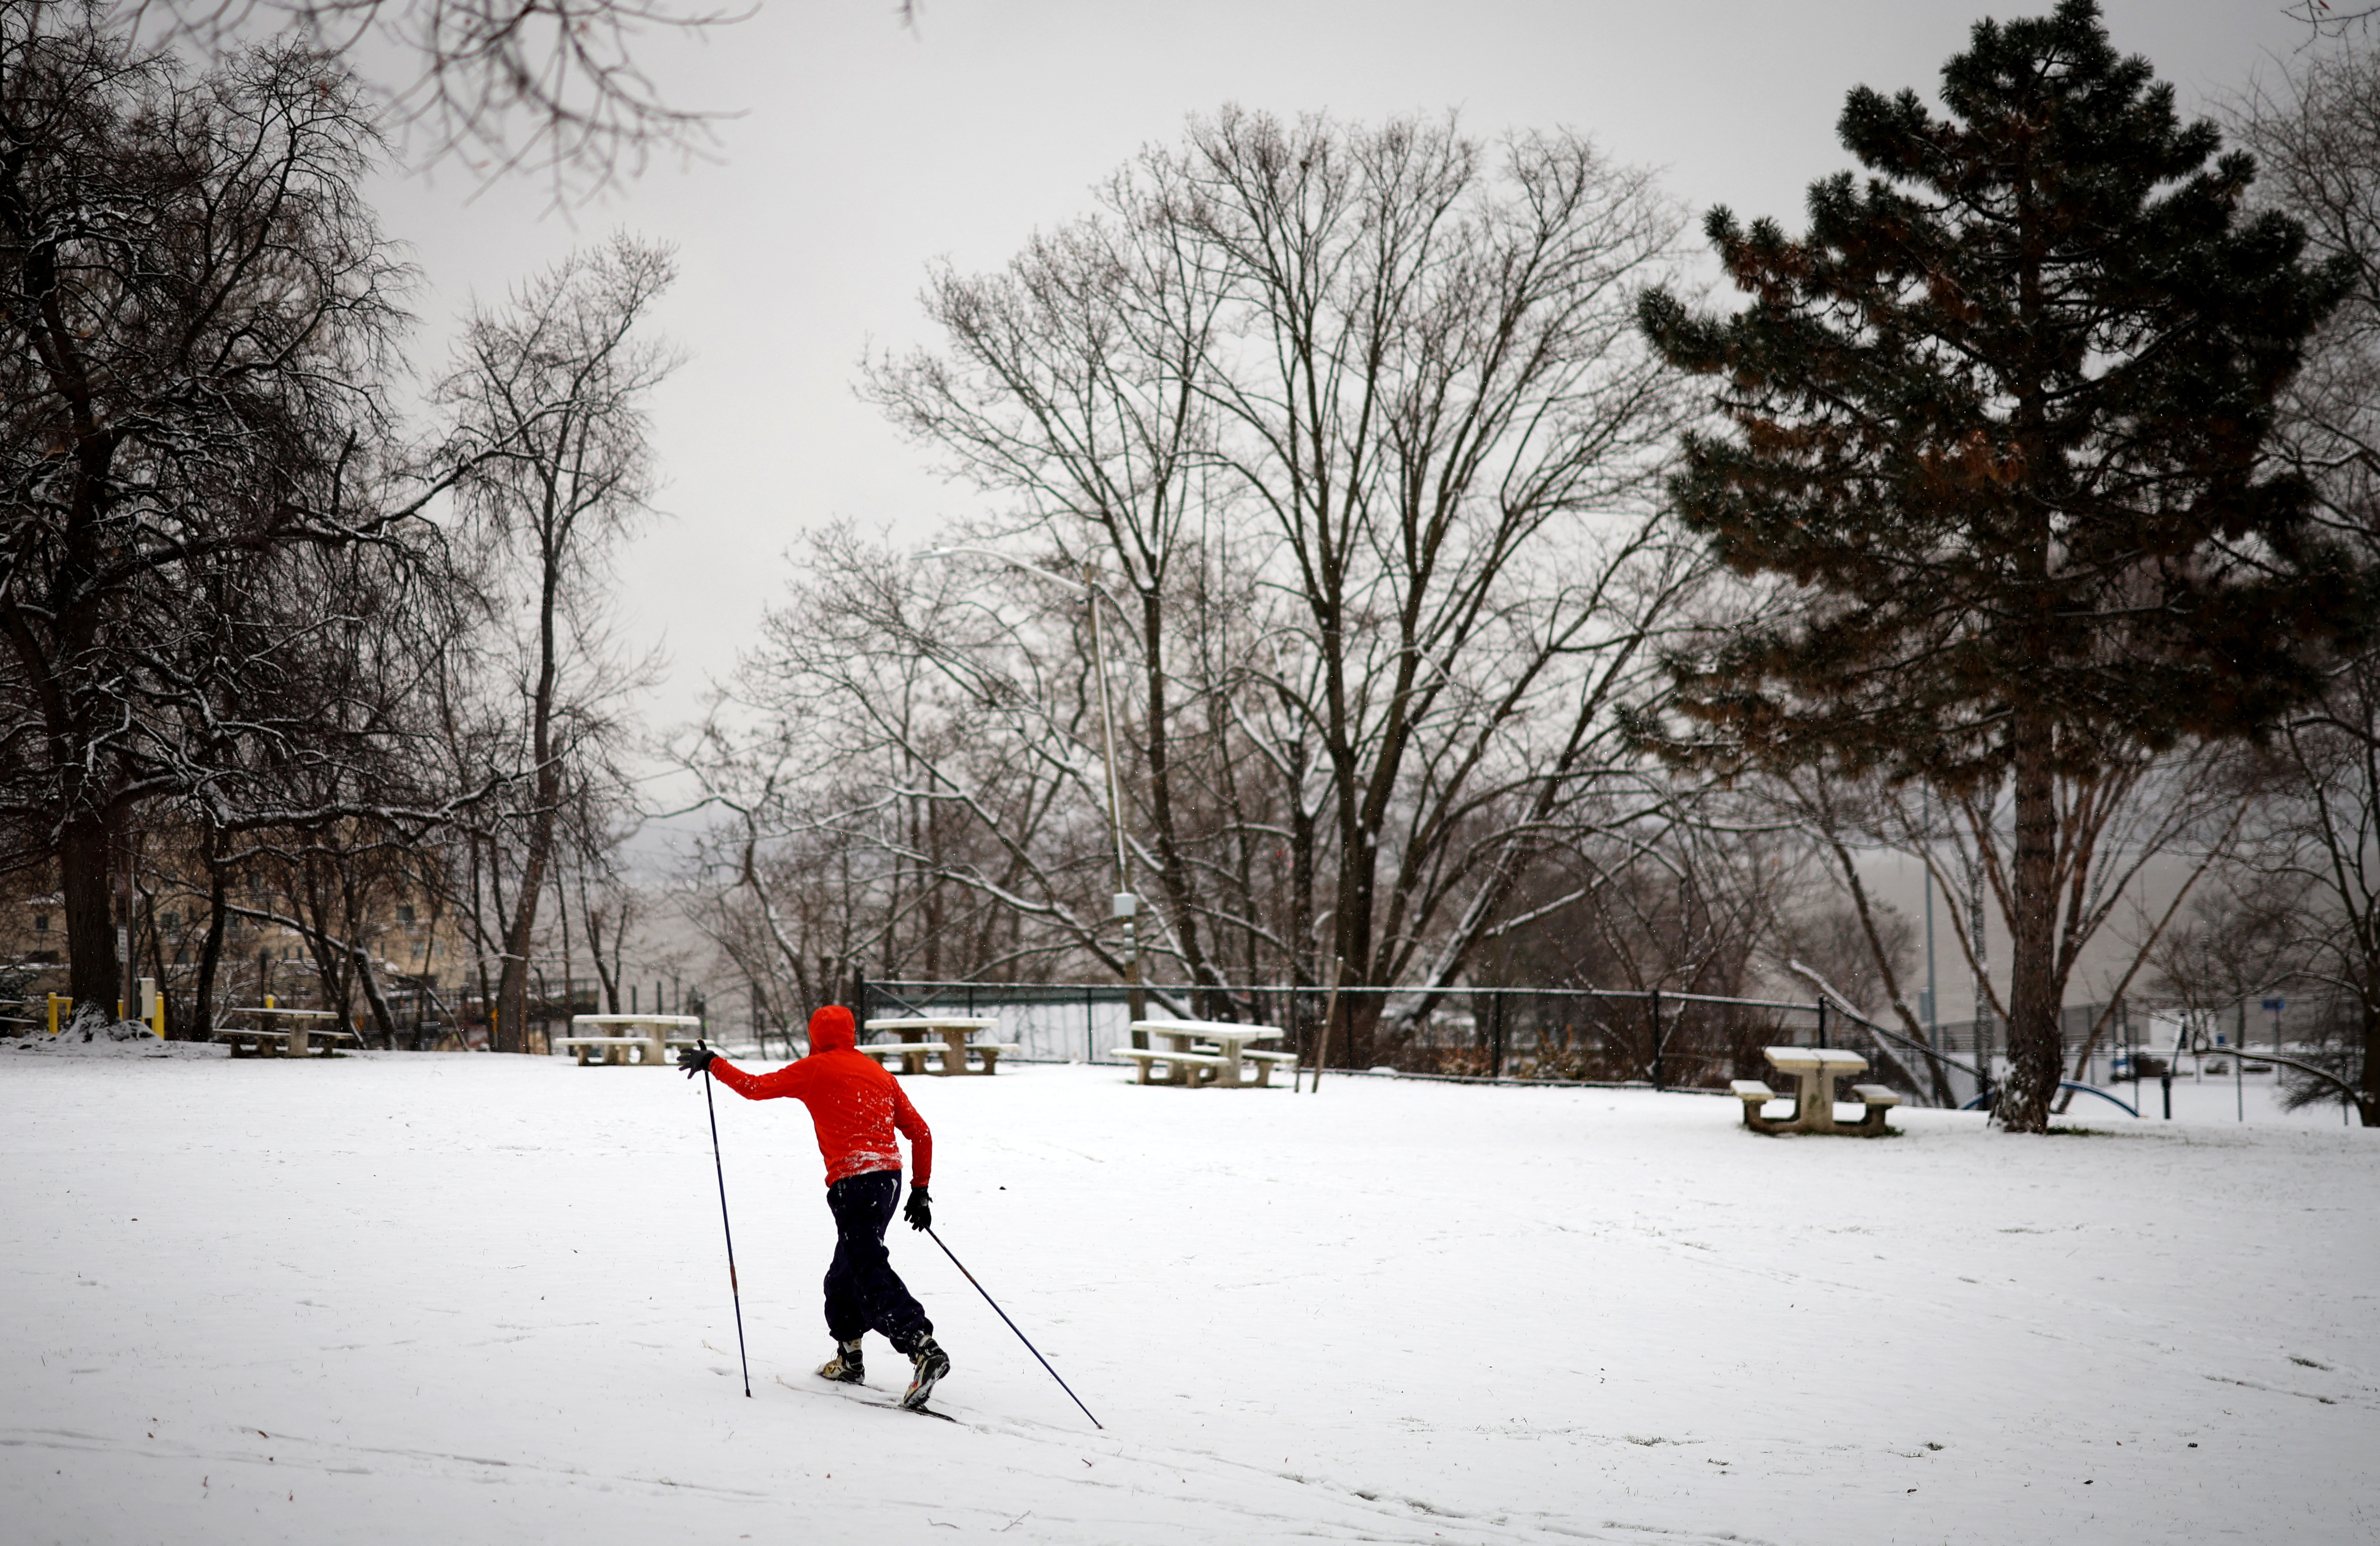 Man skis during winter weather in New York City suburb of Nyack